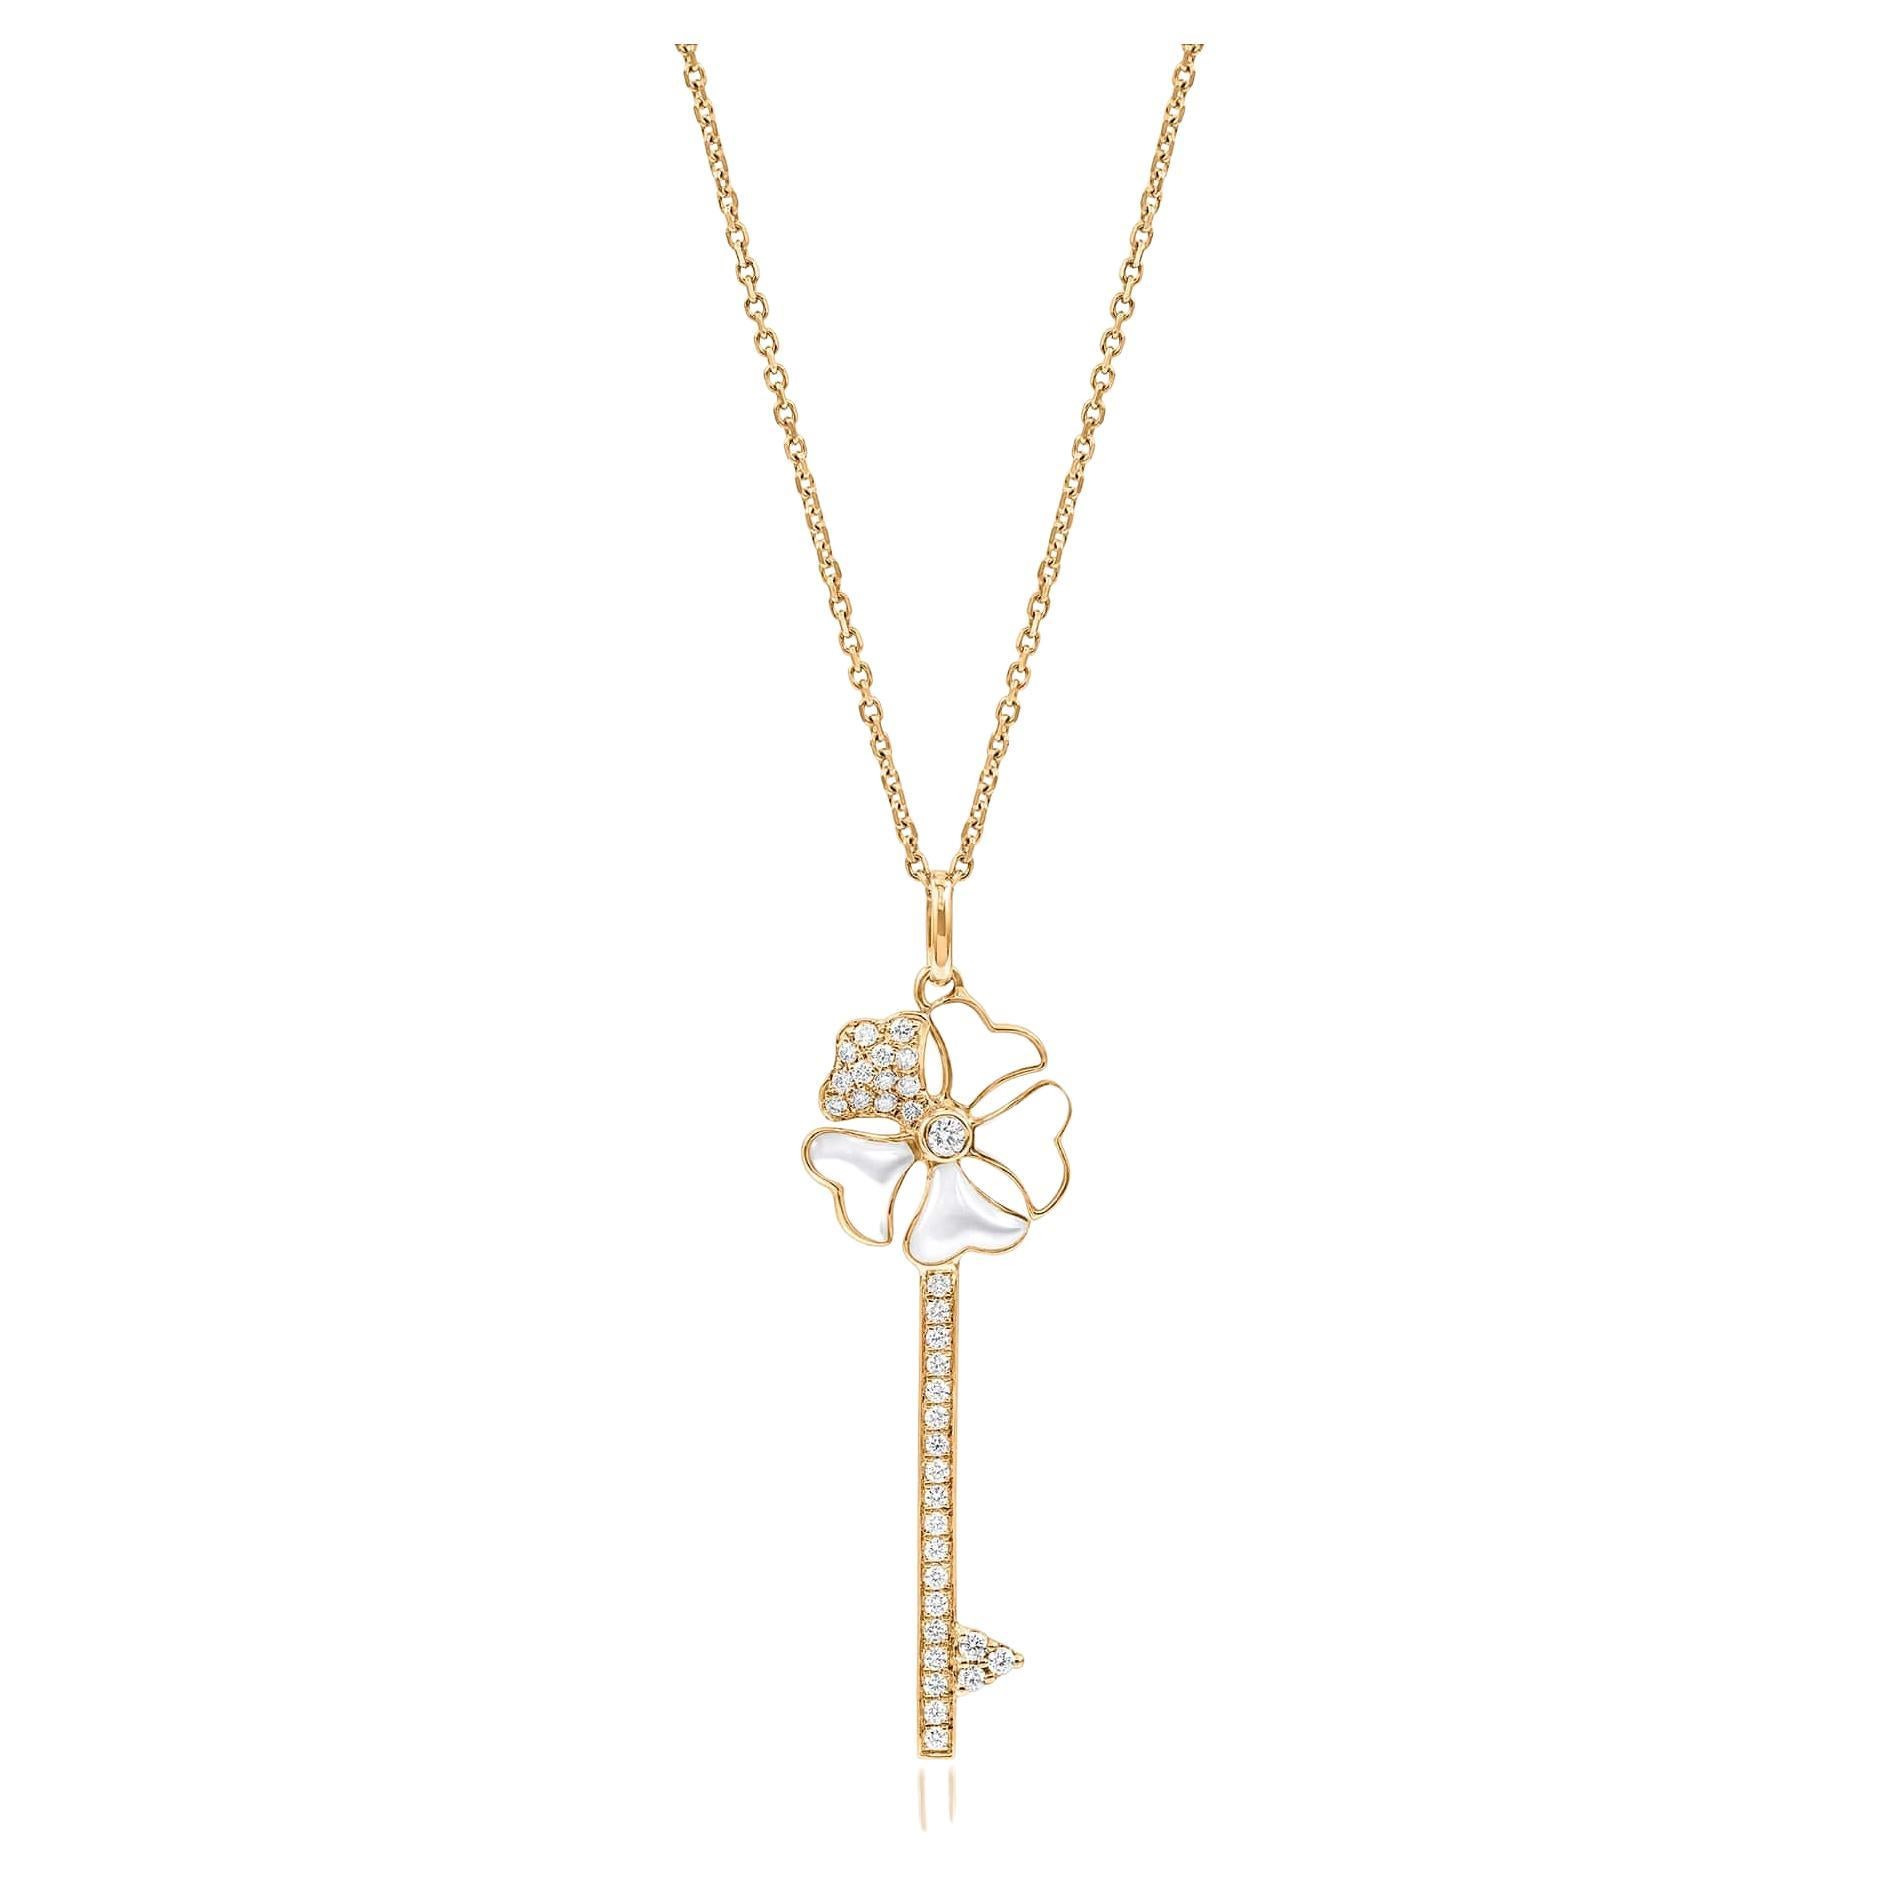 Bloom Diamond and Mother of Pearl Key Necklace in 18k Yellow Gold